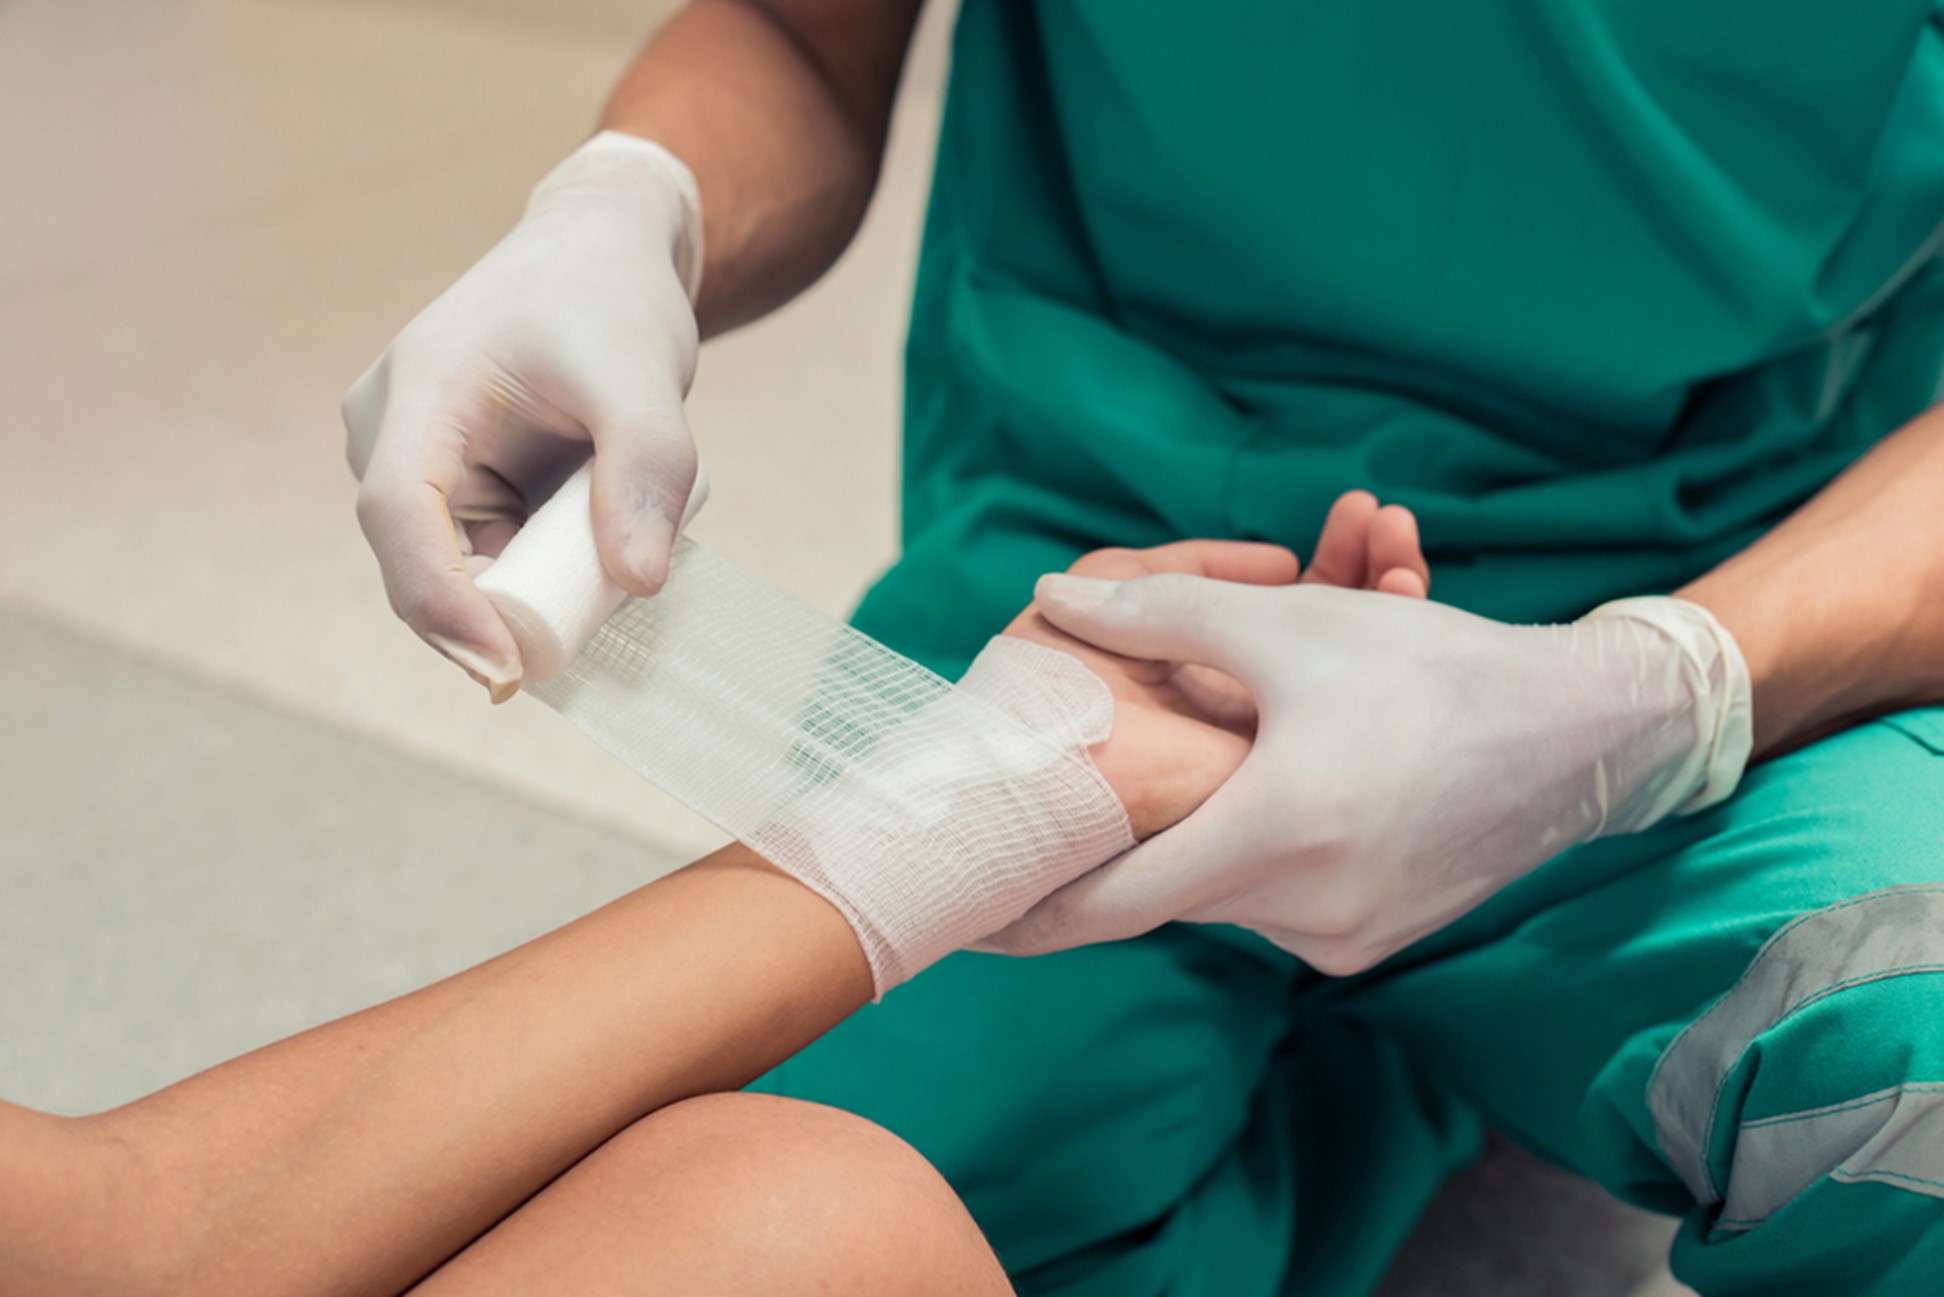 A closeup image of a medical professional in green scrubs and white gloves wrapping a wound on the wrist of a patient.